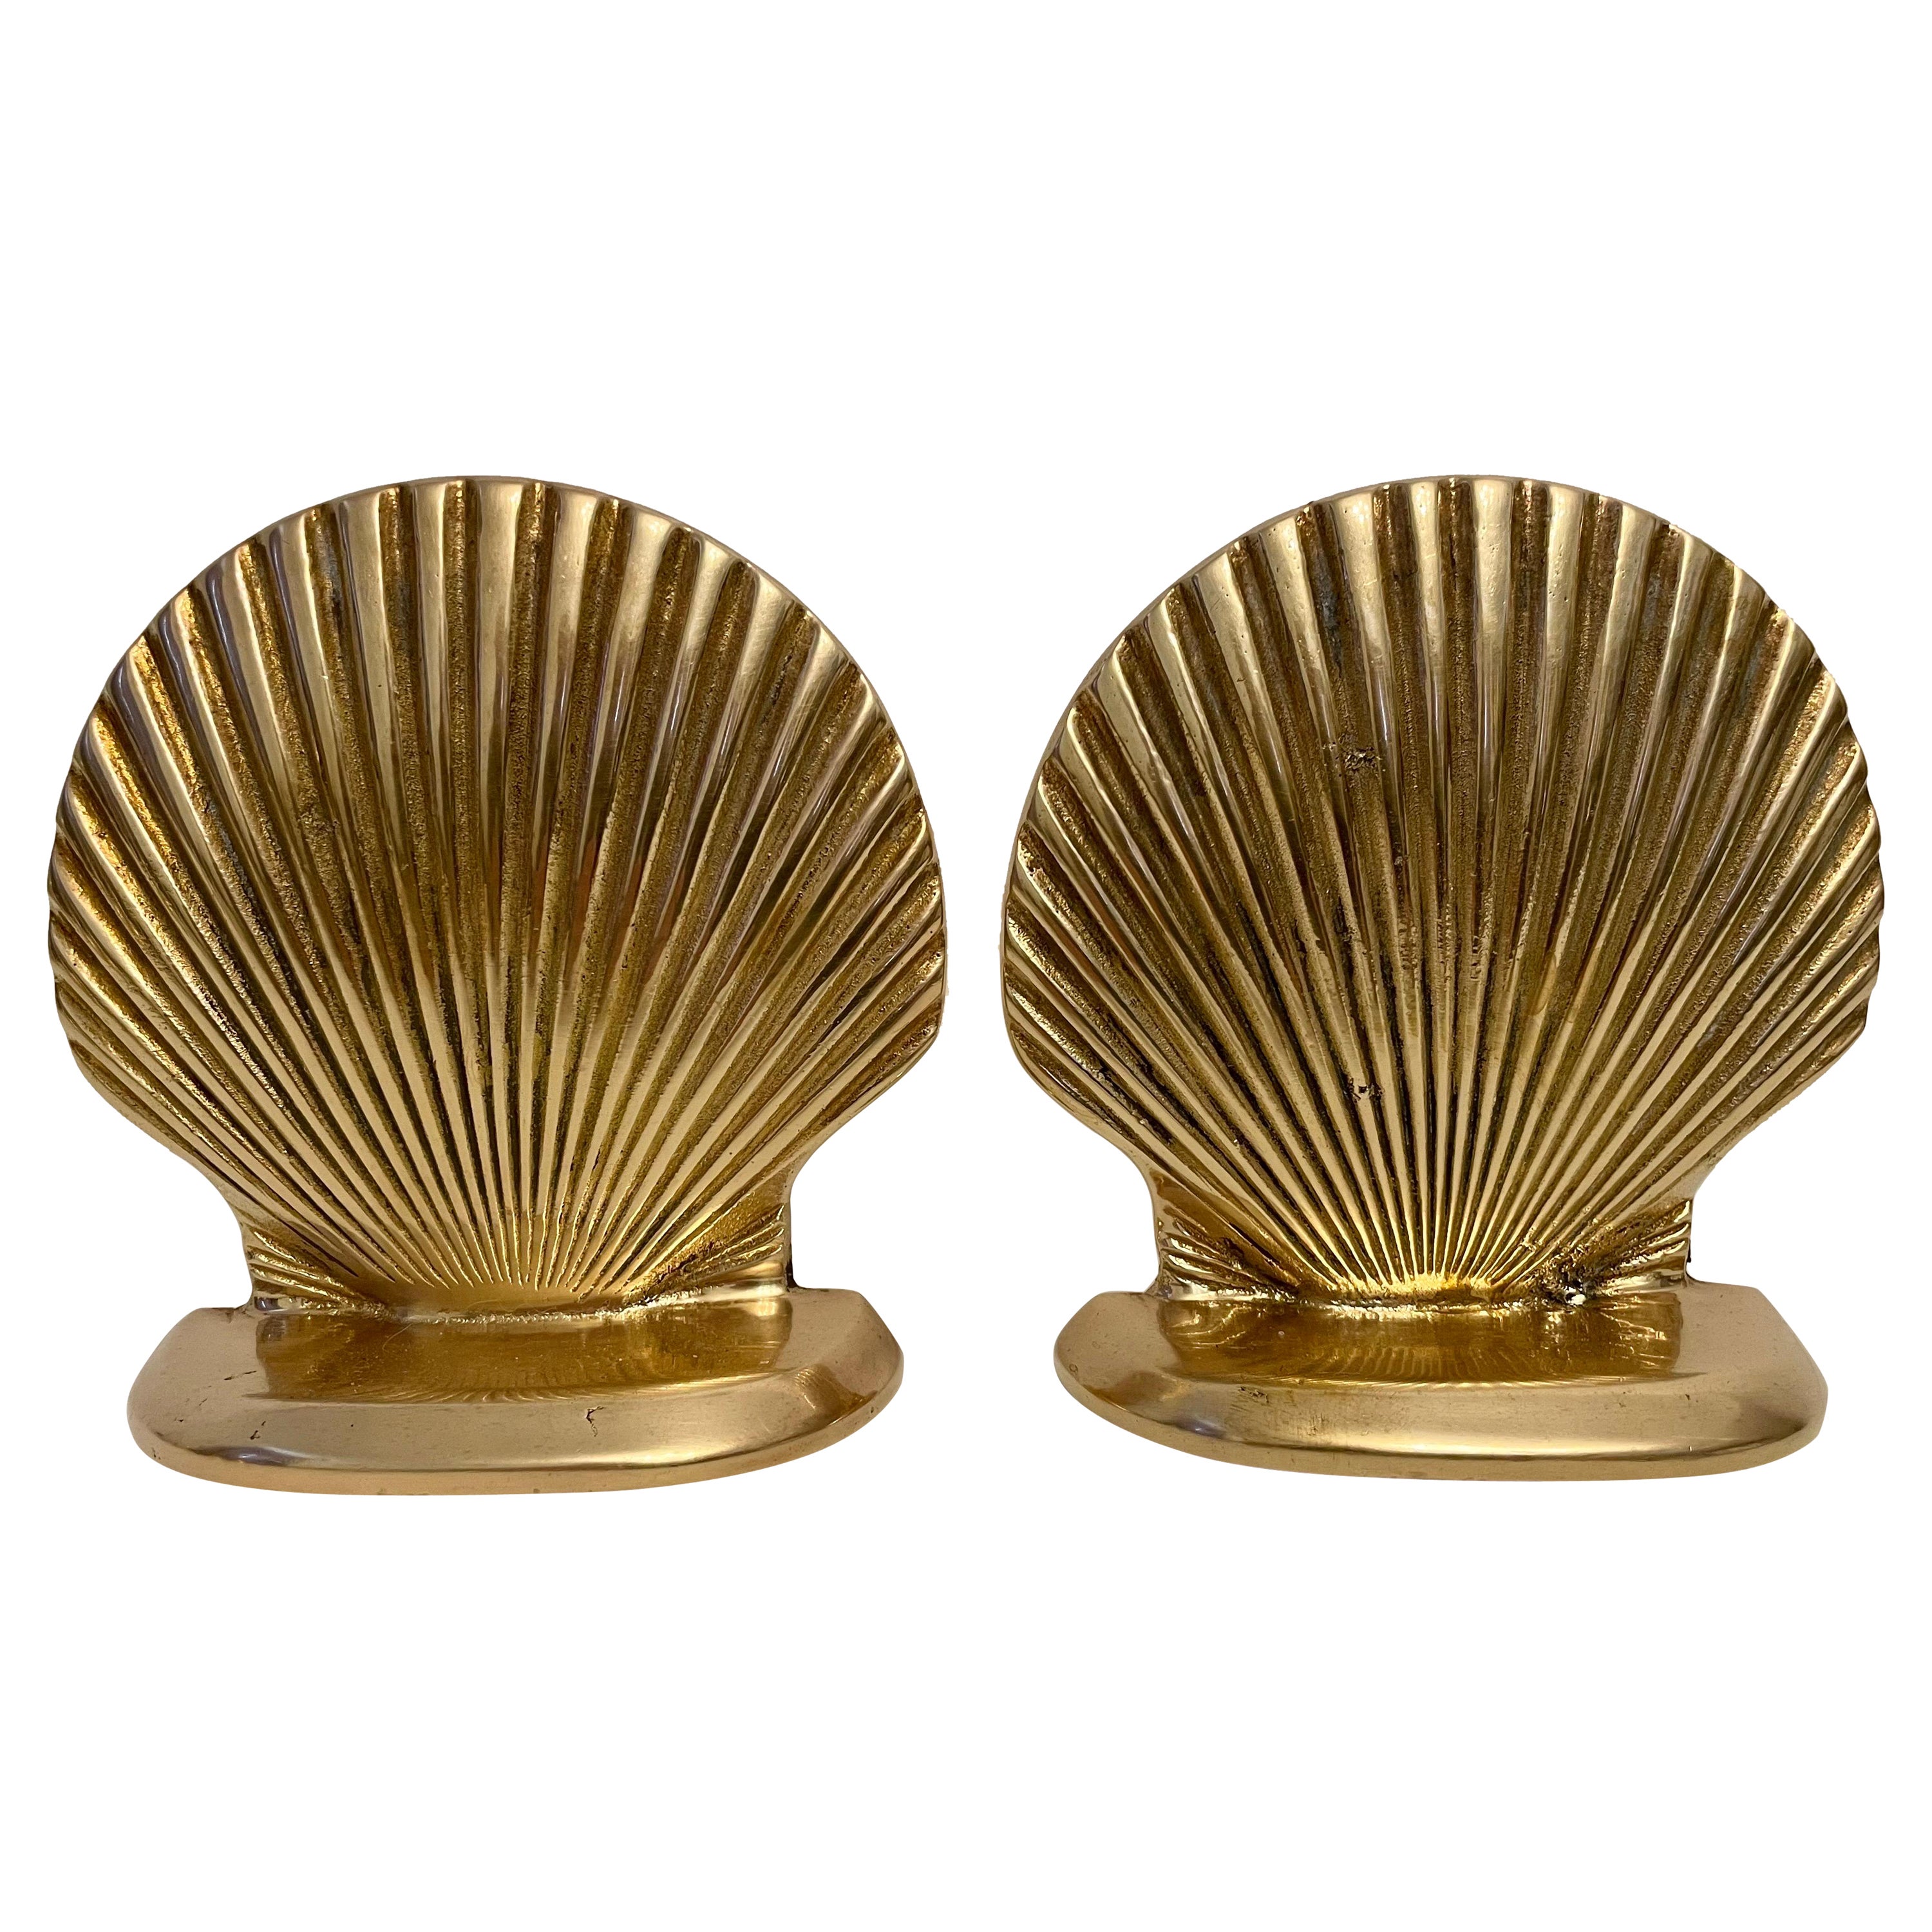 Vintage Brass Clam Shell Seashell Bookends For Sale